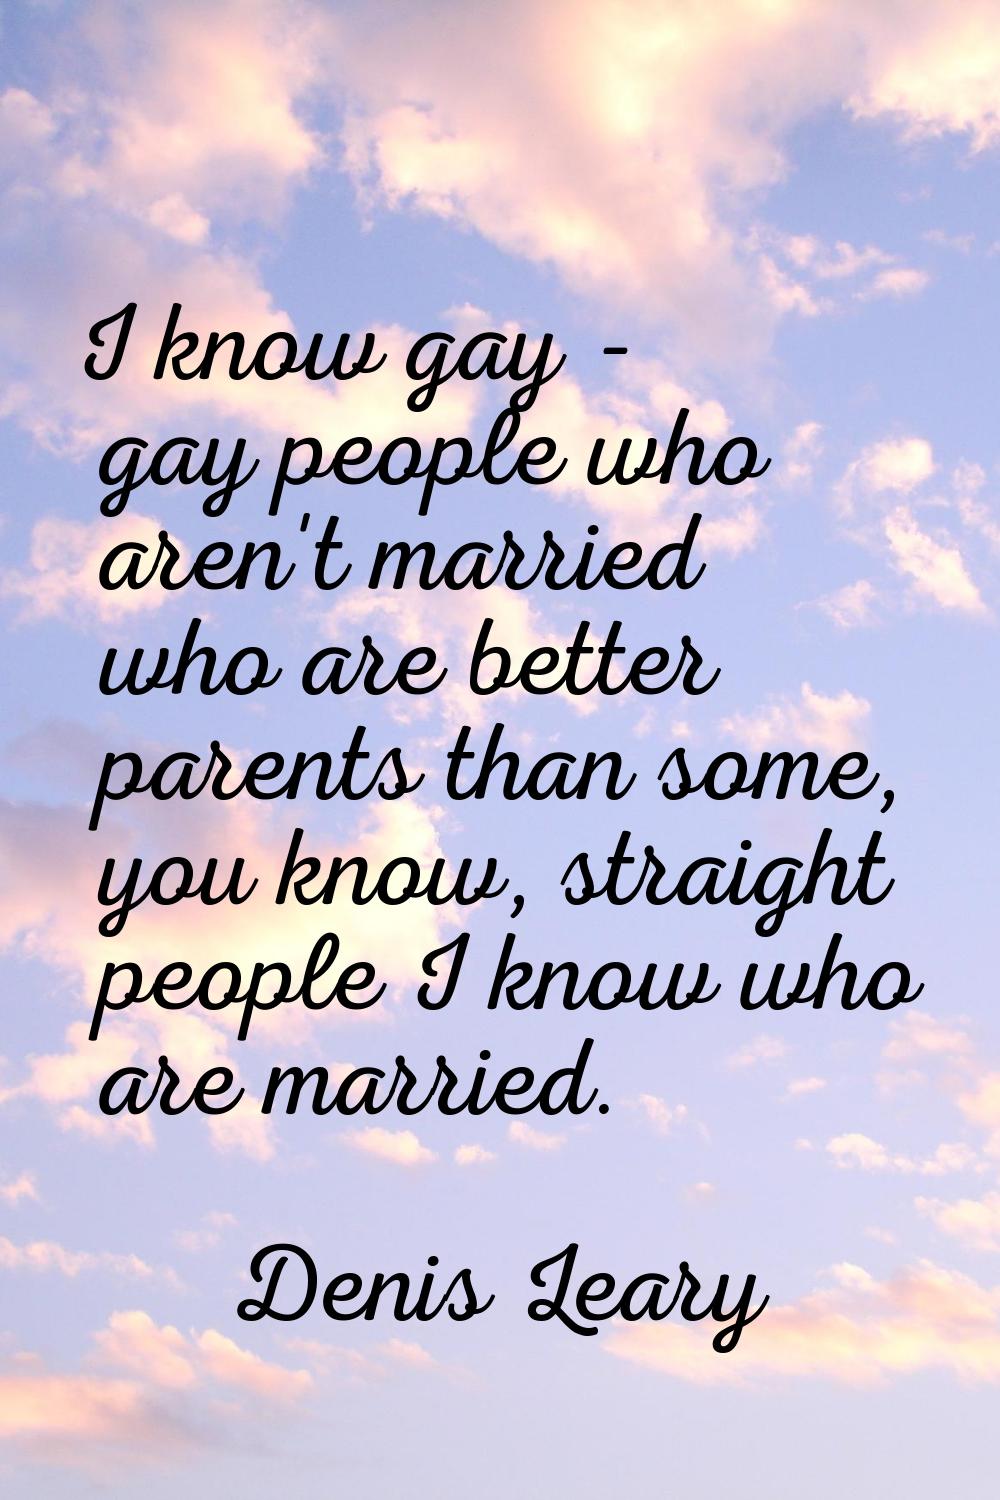 I know gay - gay people who aren't married who are better parents than some, you know, straight peo